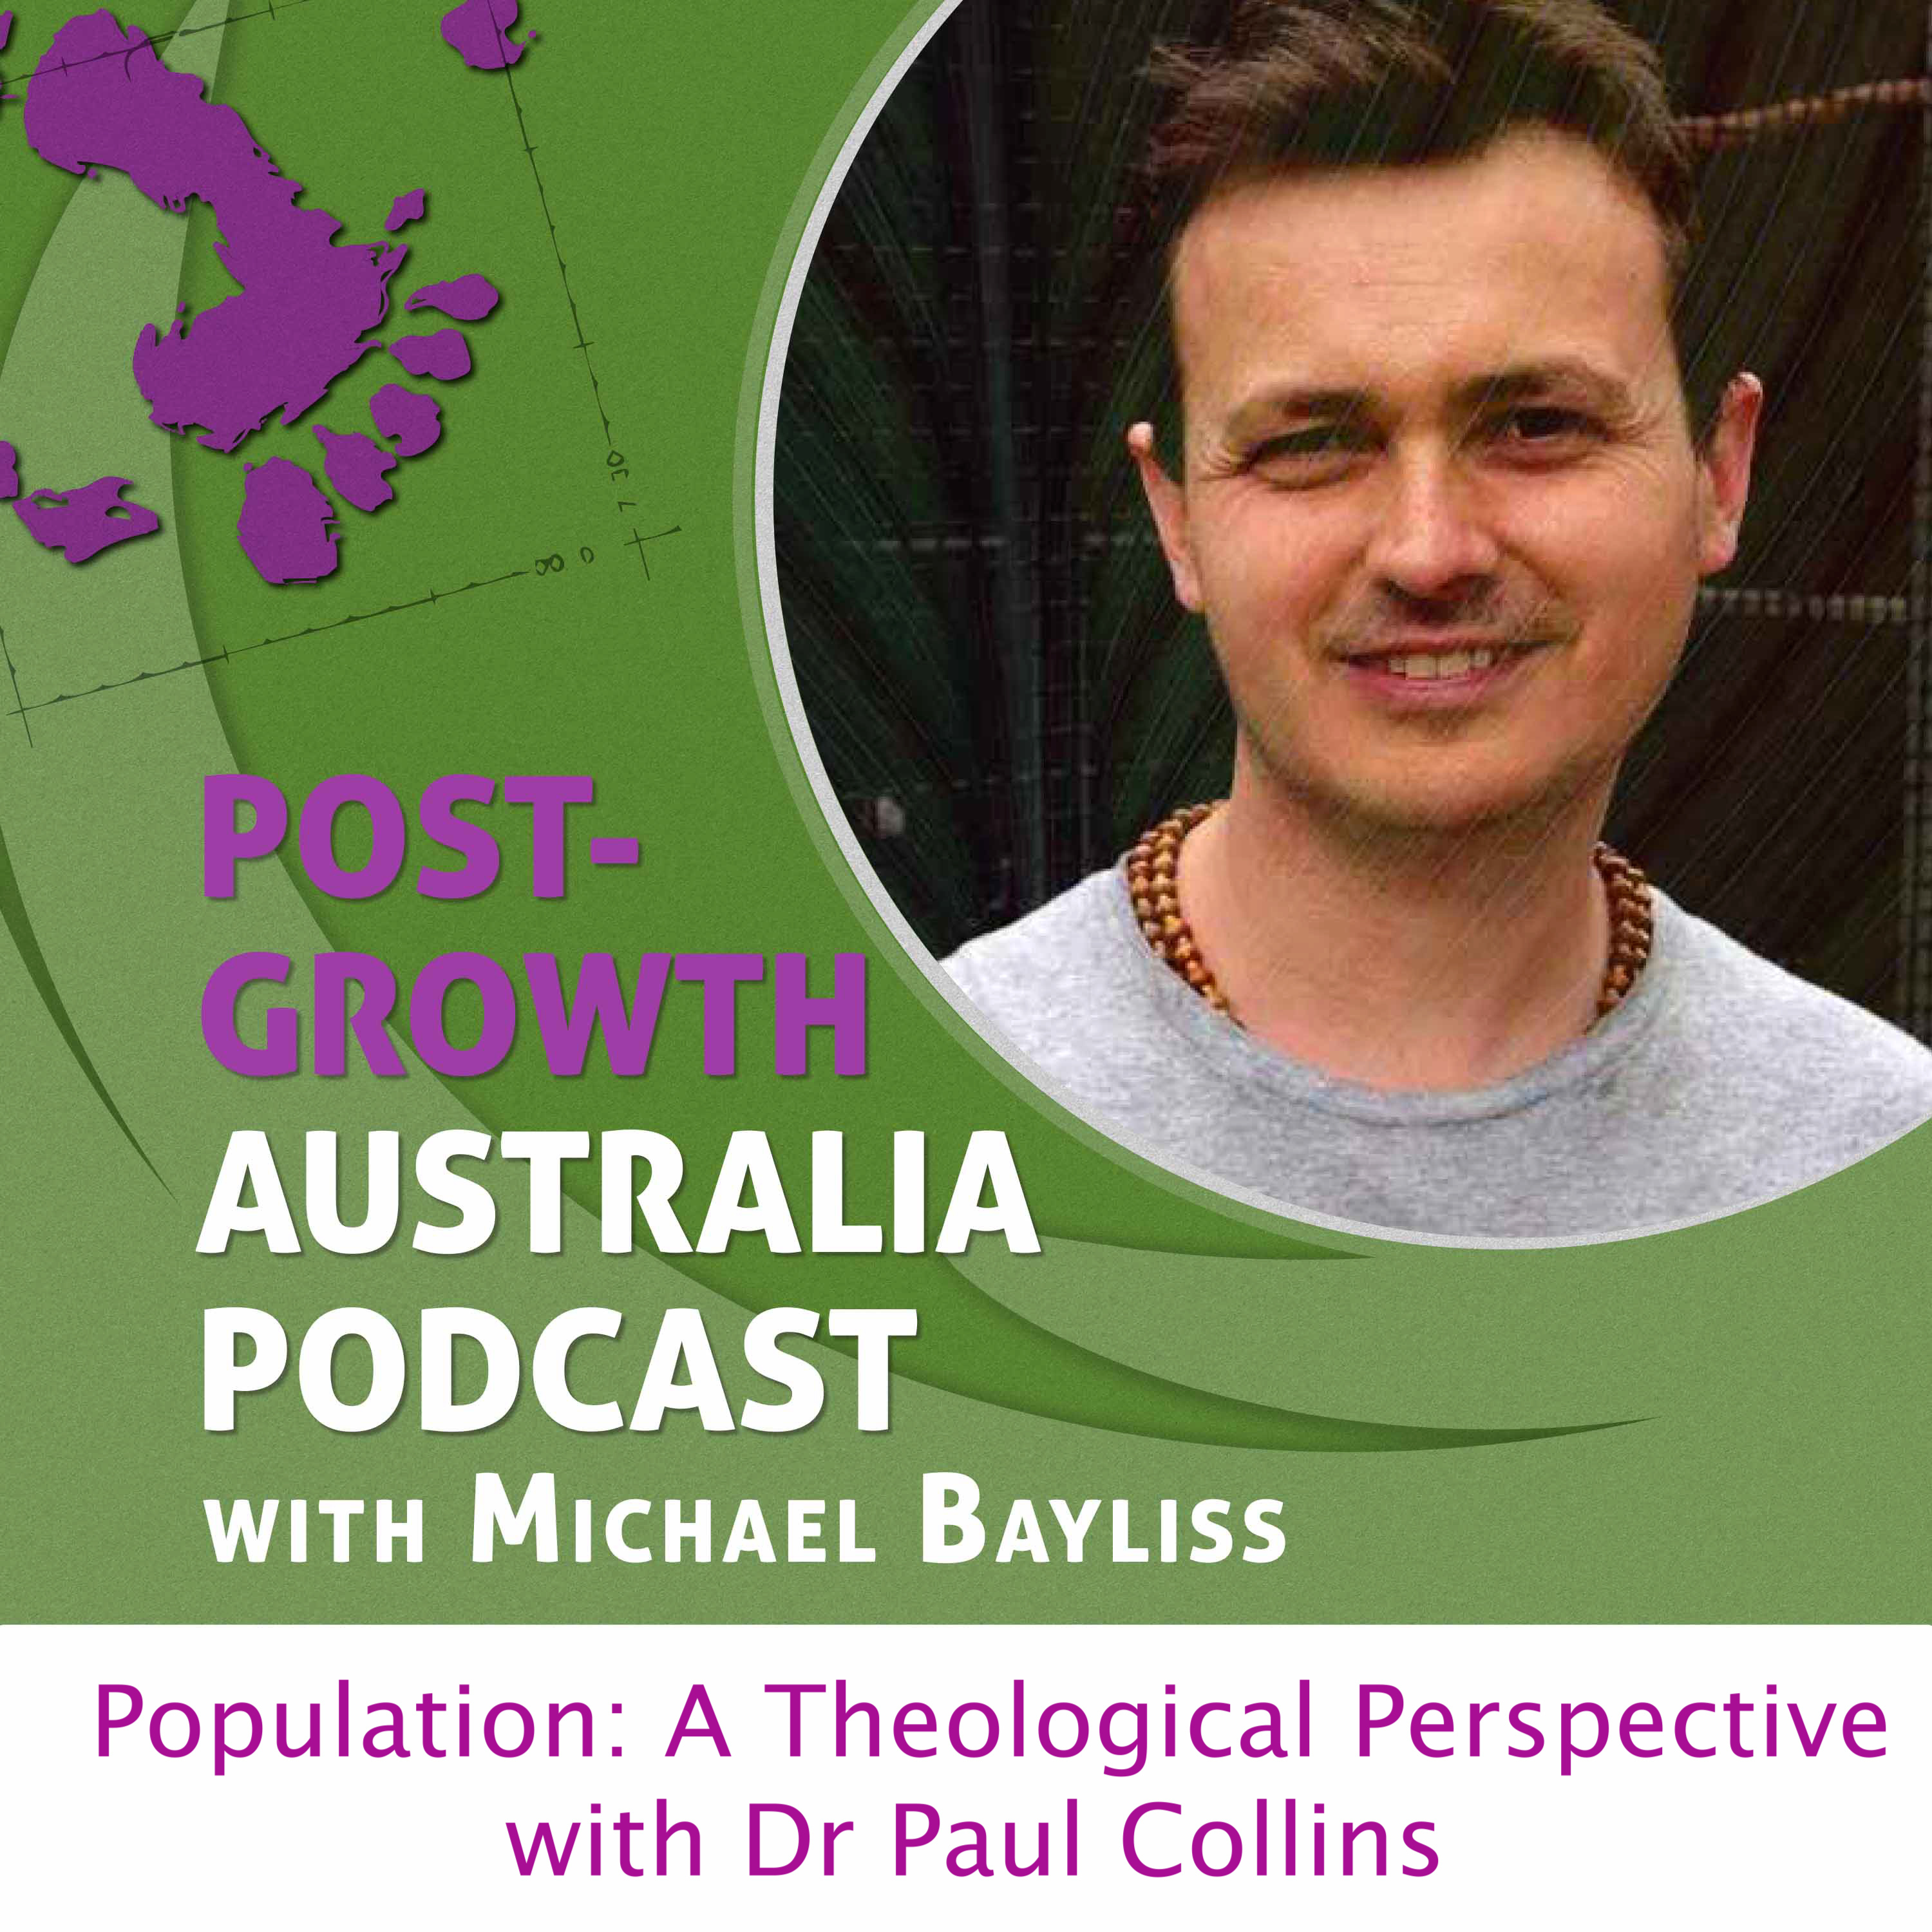 A Theological Perspective on Population with Dr Paul Collins